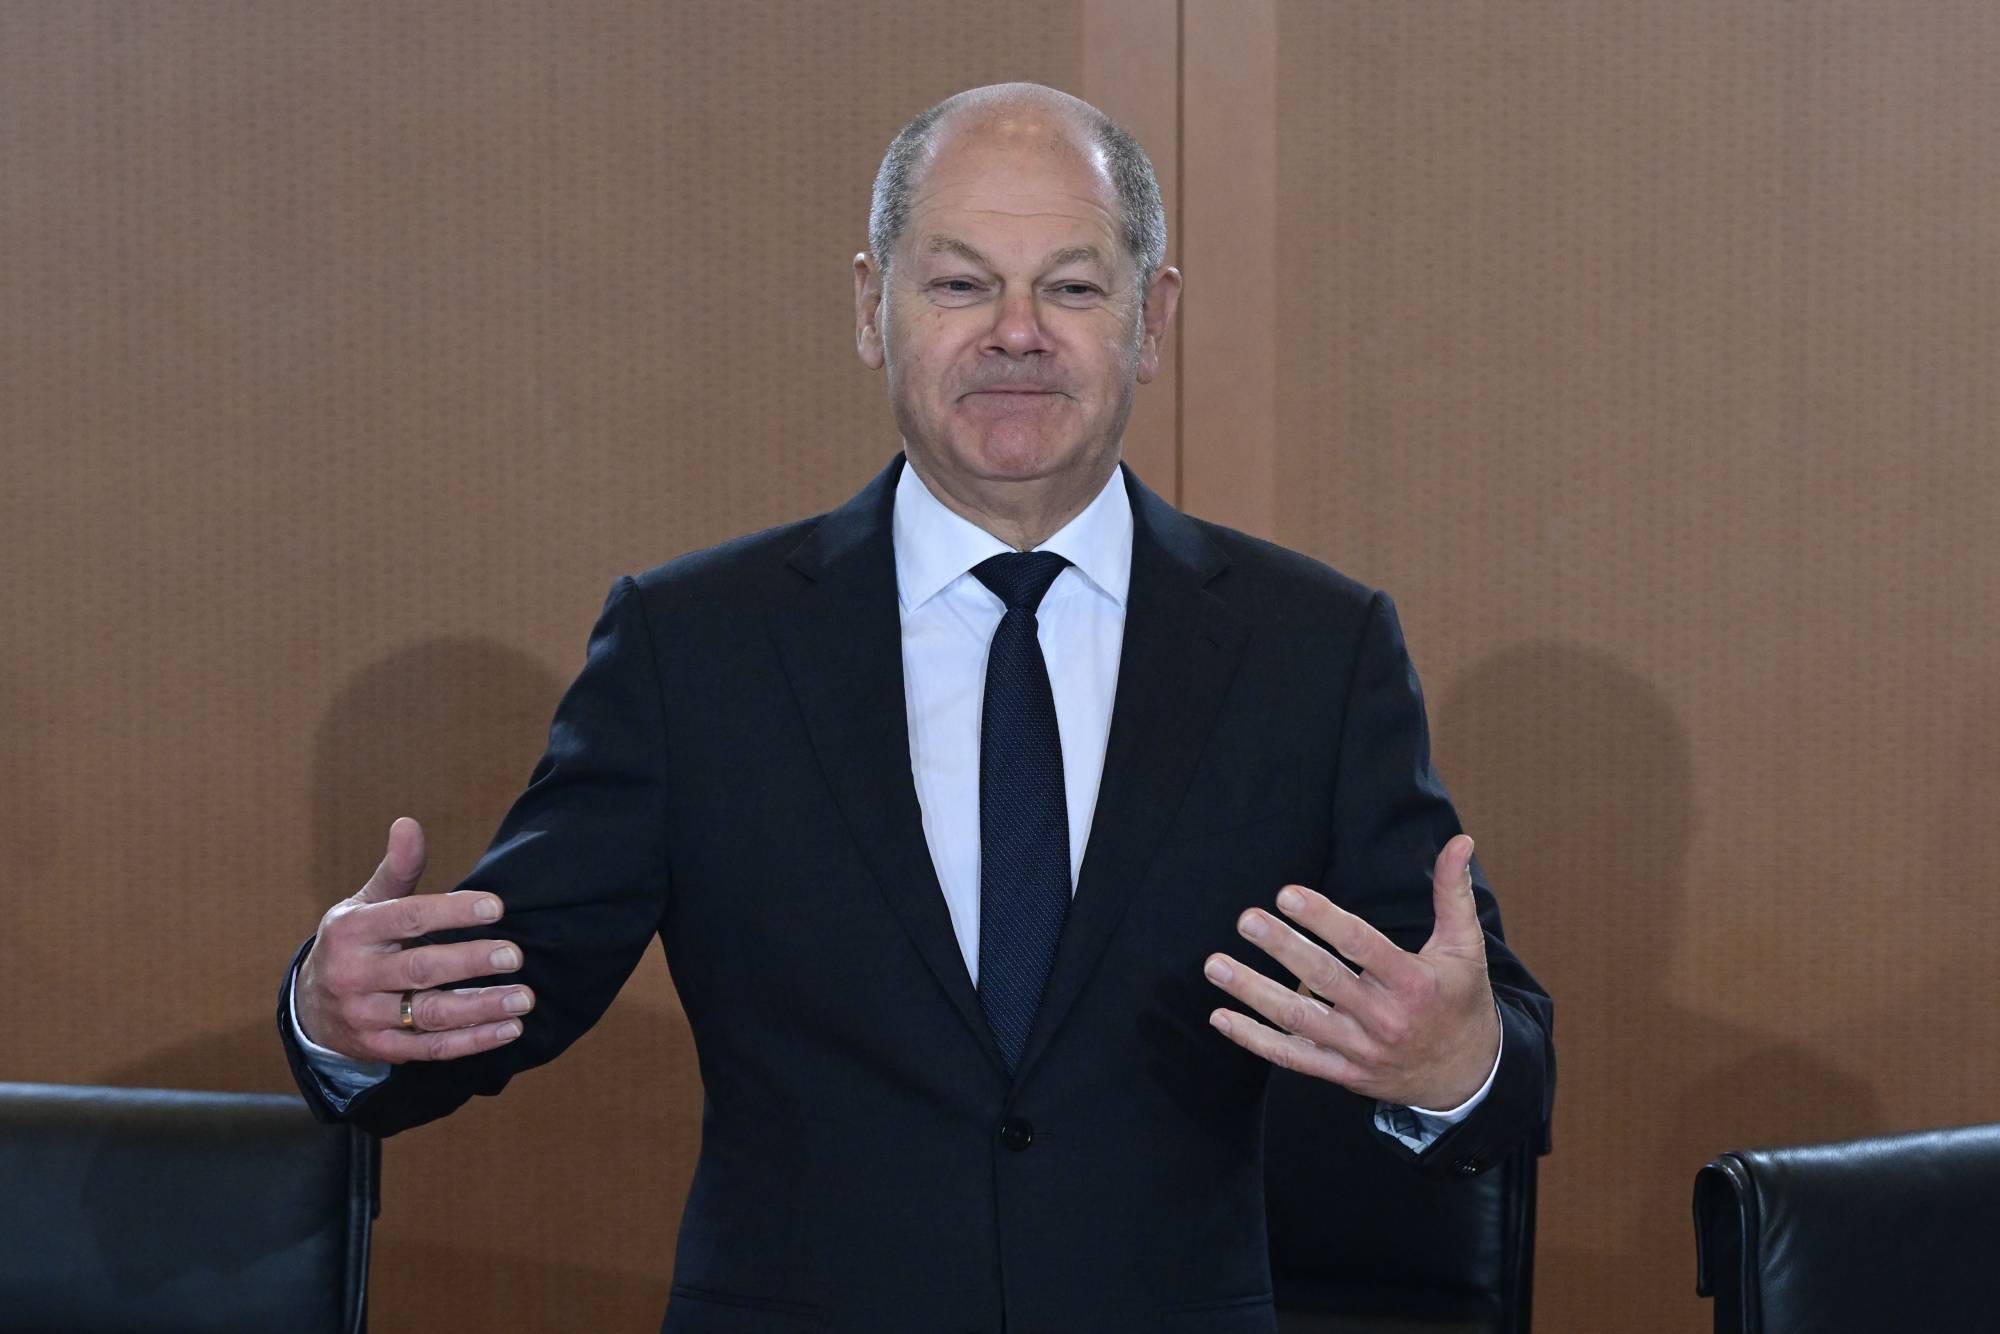 German Chancellor Olaf Scholz speaks to Cabinet members in Berlin on Dec. 7. Germany aims move away from coal use by 2038, but the current government is pushing for an even earlier target of 2030. | AFP-JIJI